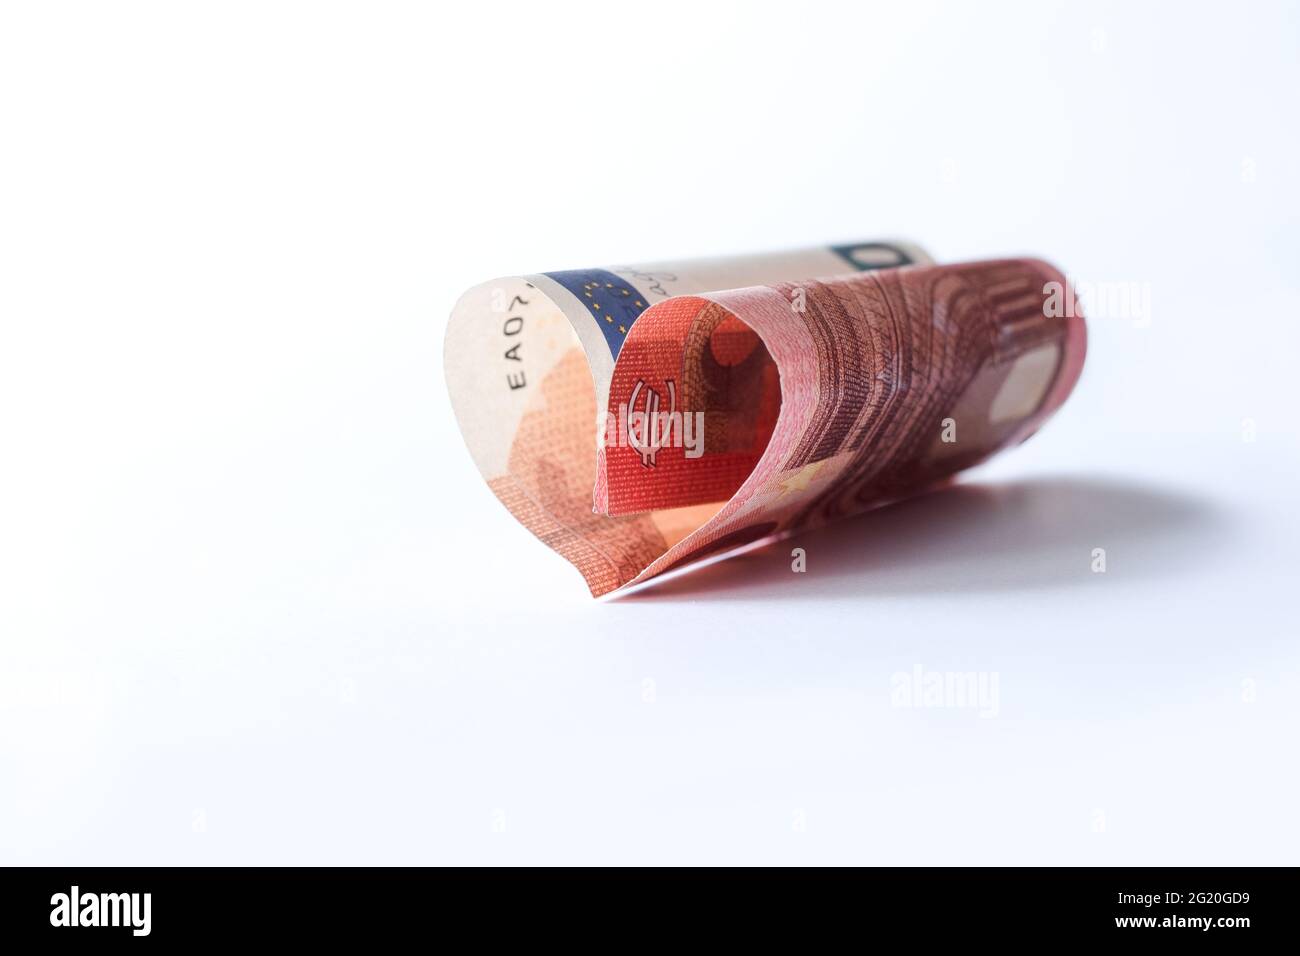 Love and money concept. Financial freedom theme - collect wealth by saving and investing small sums. Stock Photo